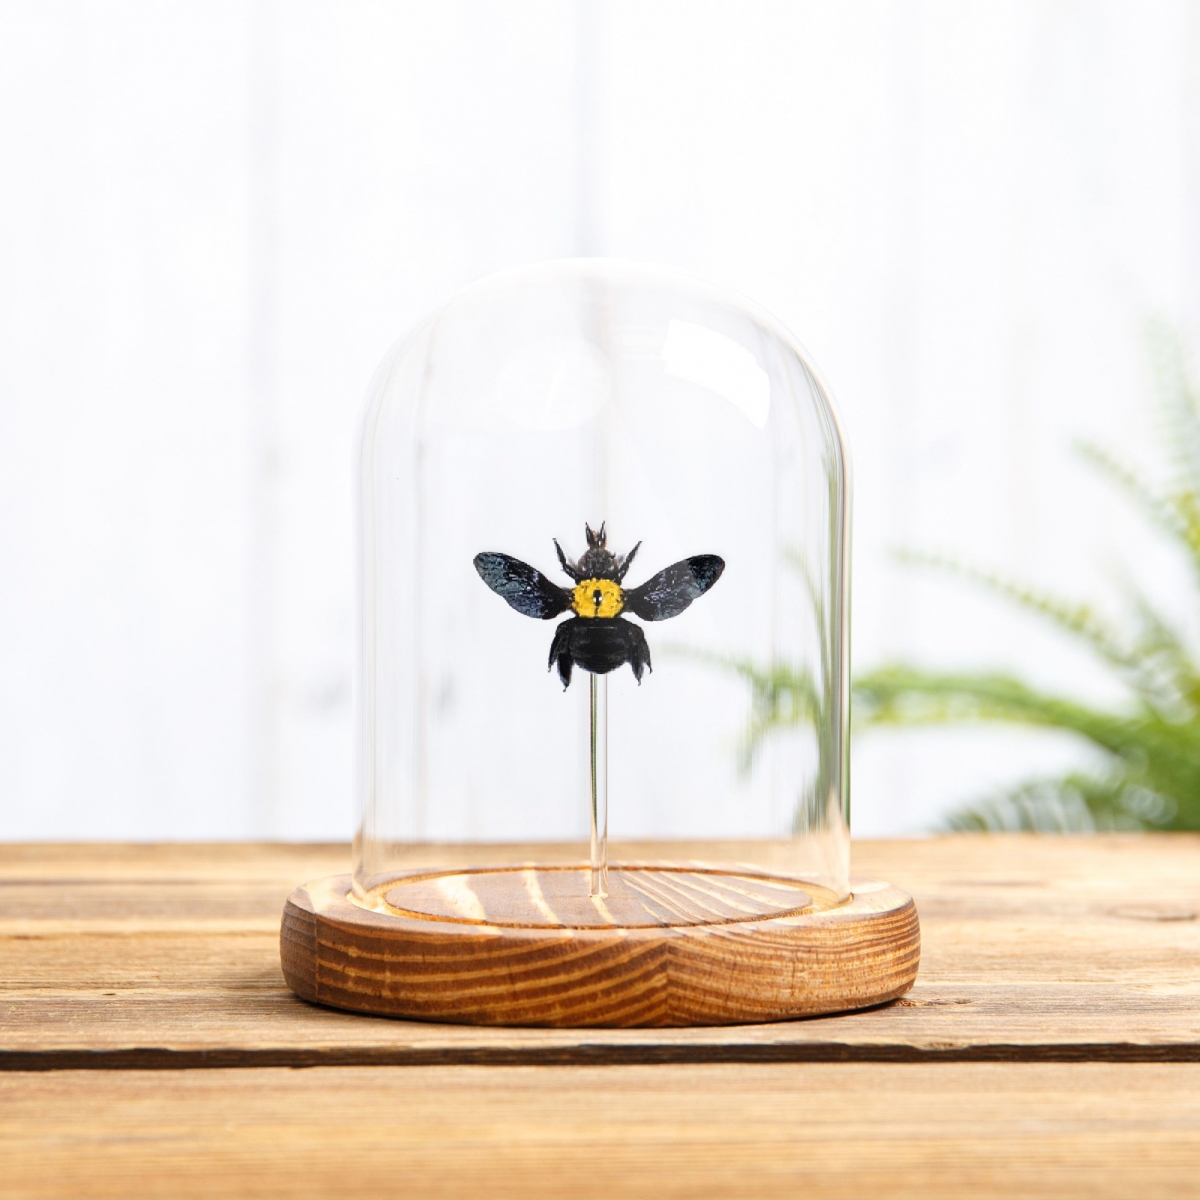 The Yellow Spot Carpenter Bee in Glass Dome with Wooden Base (Xylocopa confusa)